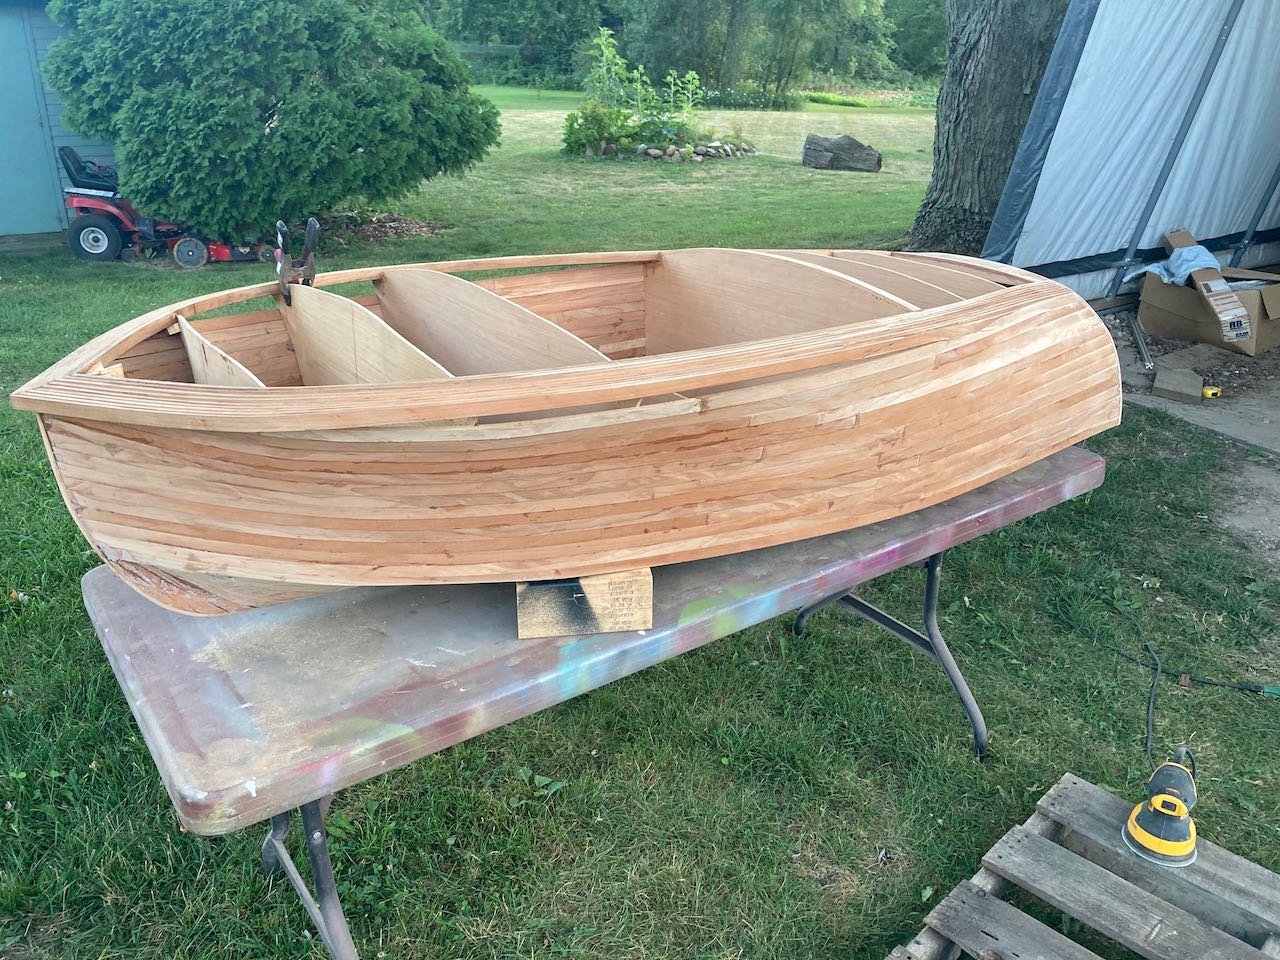 Building a Powerboat